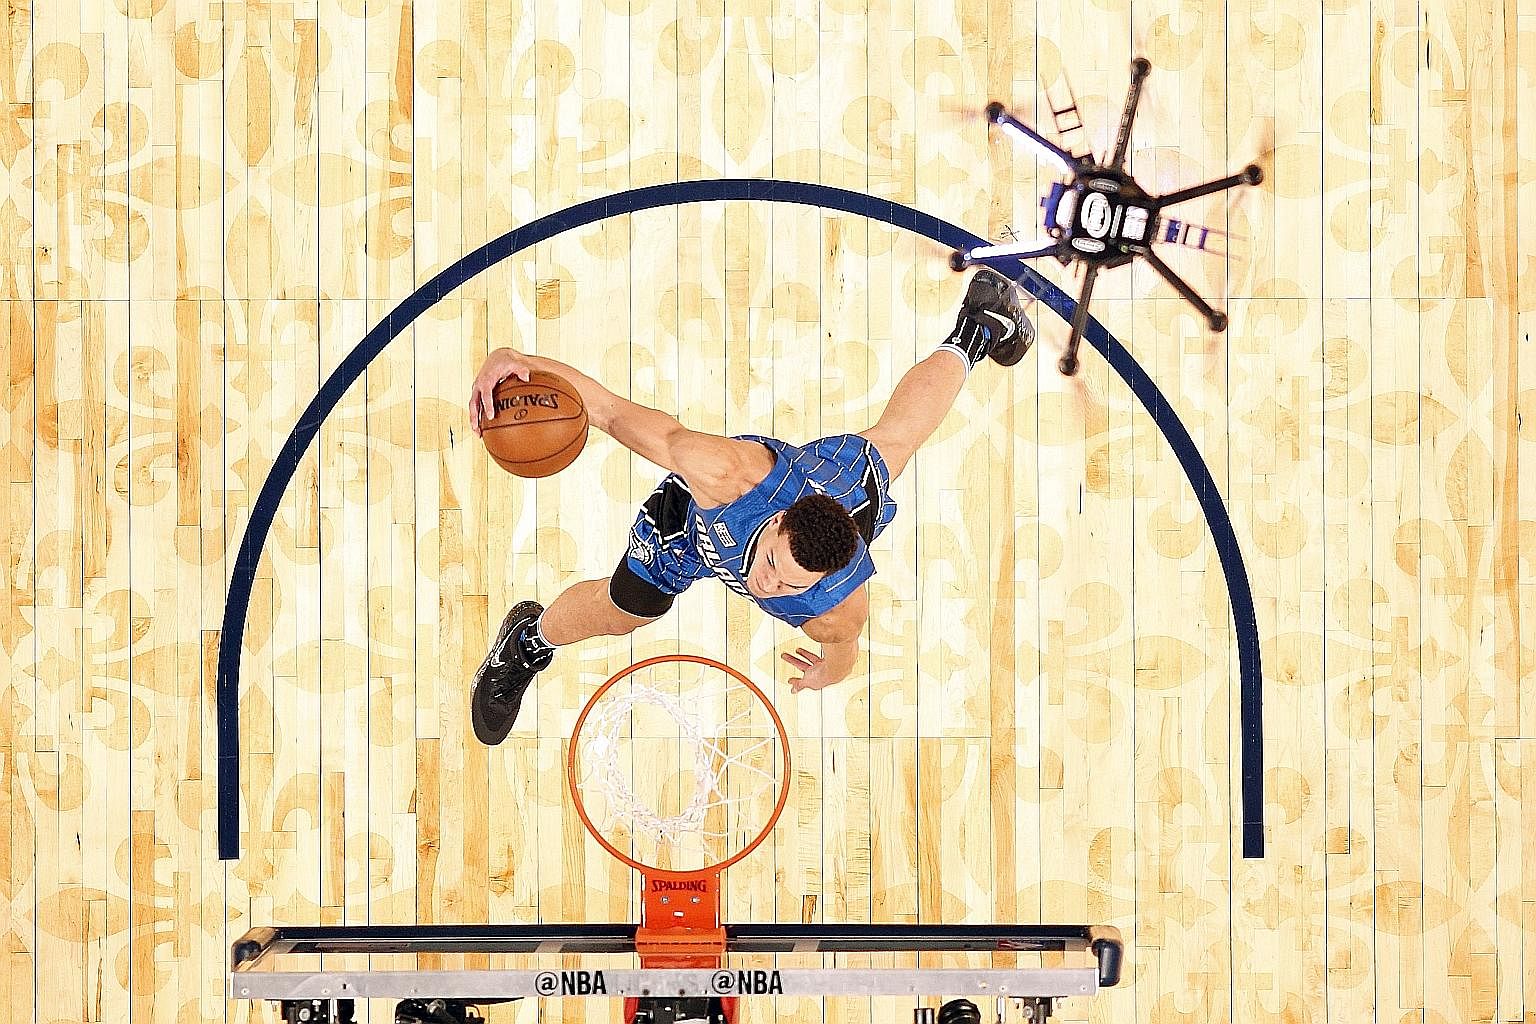 Orlando Magic forward Aaron Gordon attempting a dunk with a ball dropped by a drone in a slam dunk contest during the NBA All-Star Saturday Night at Smoothie King Centre in New Orleans on Feb 18.